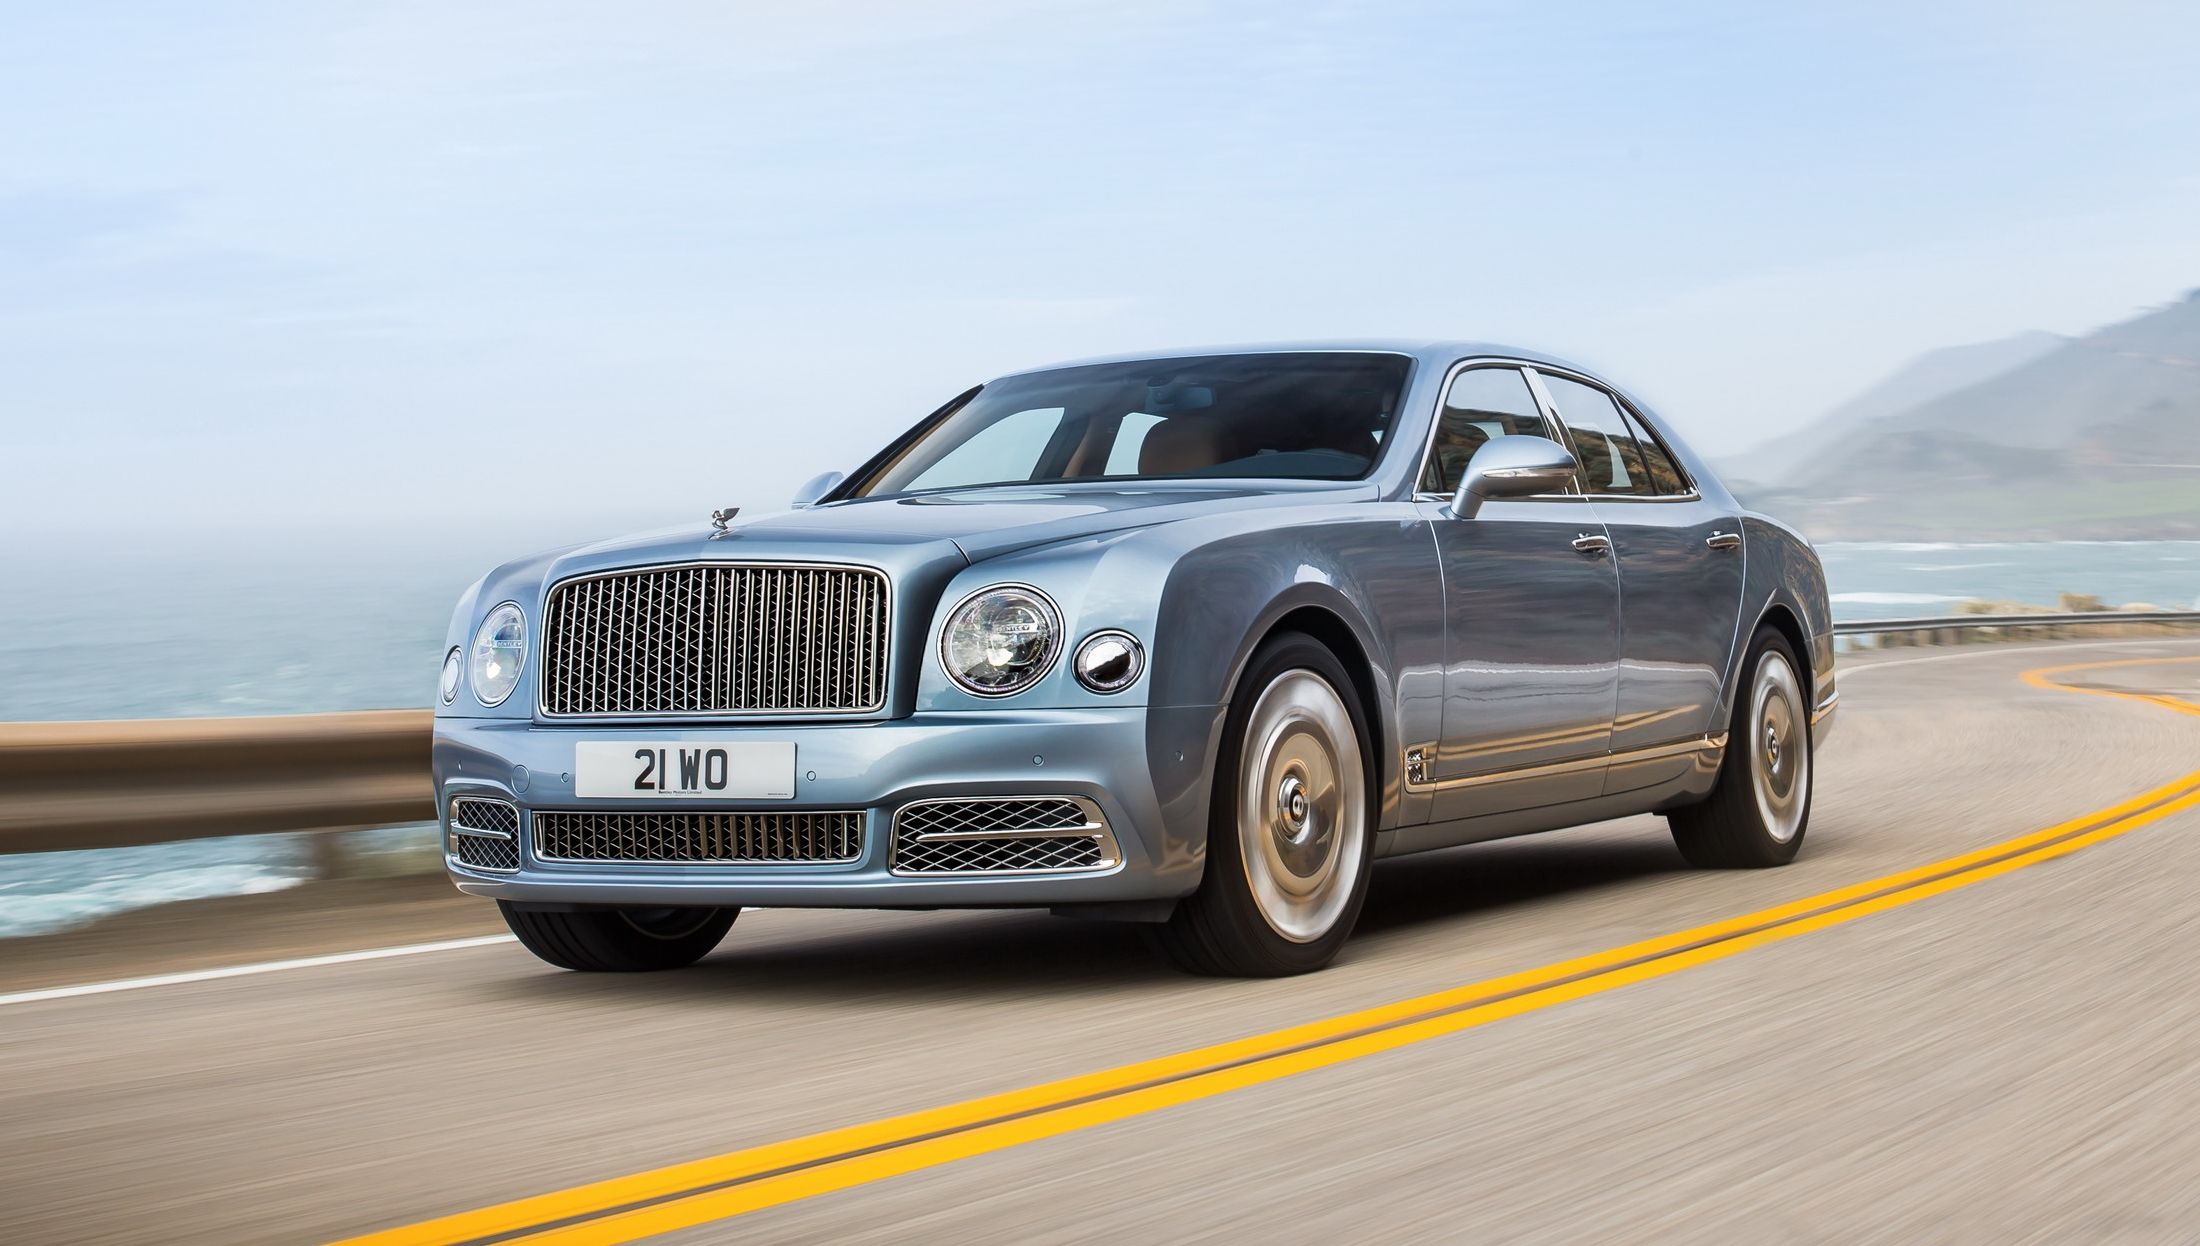 2020 Big Surprise: Bentley Is Considering An SUV to Replace the Now Defunct Mulsanne Sedan